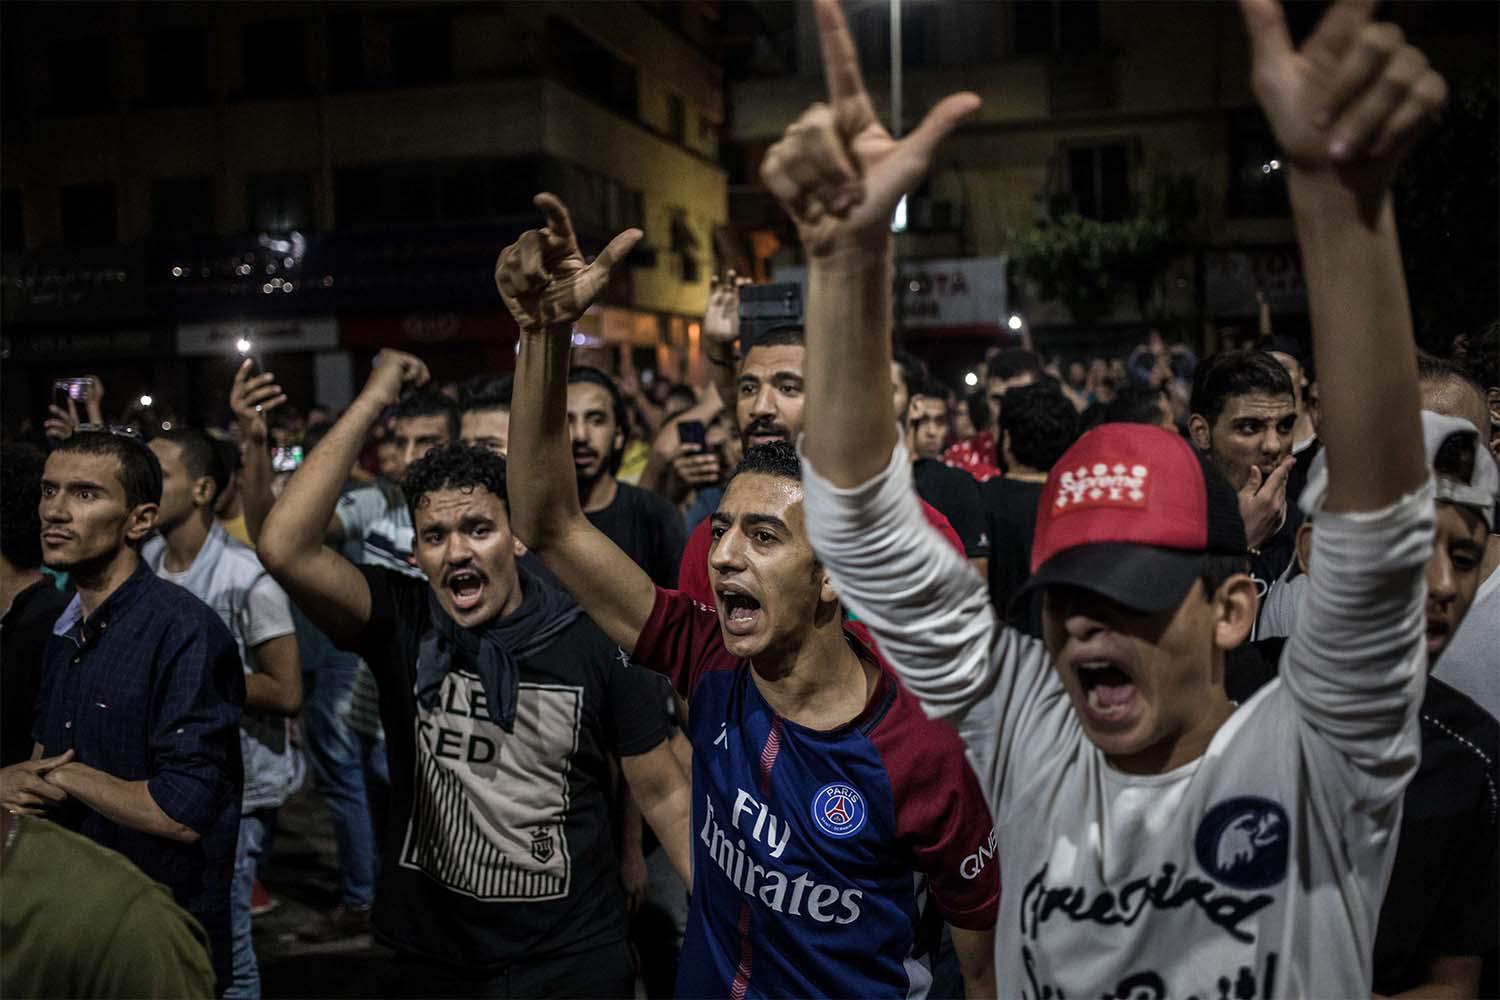 Protesters shout slogans during a rare anti-government protest in Downtown Cairo